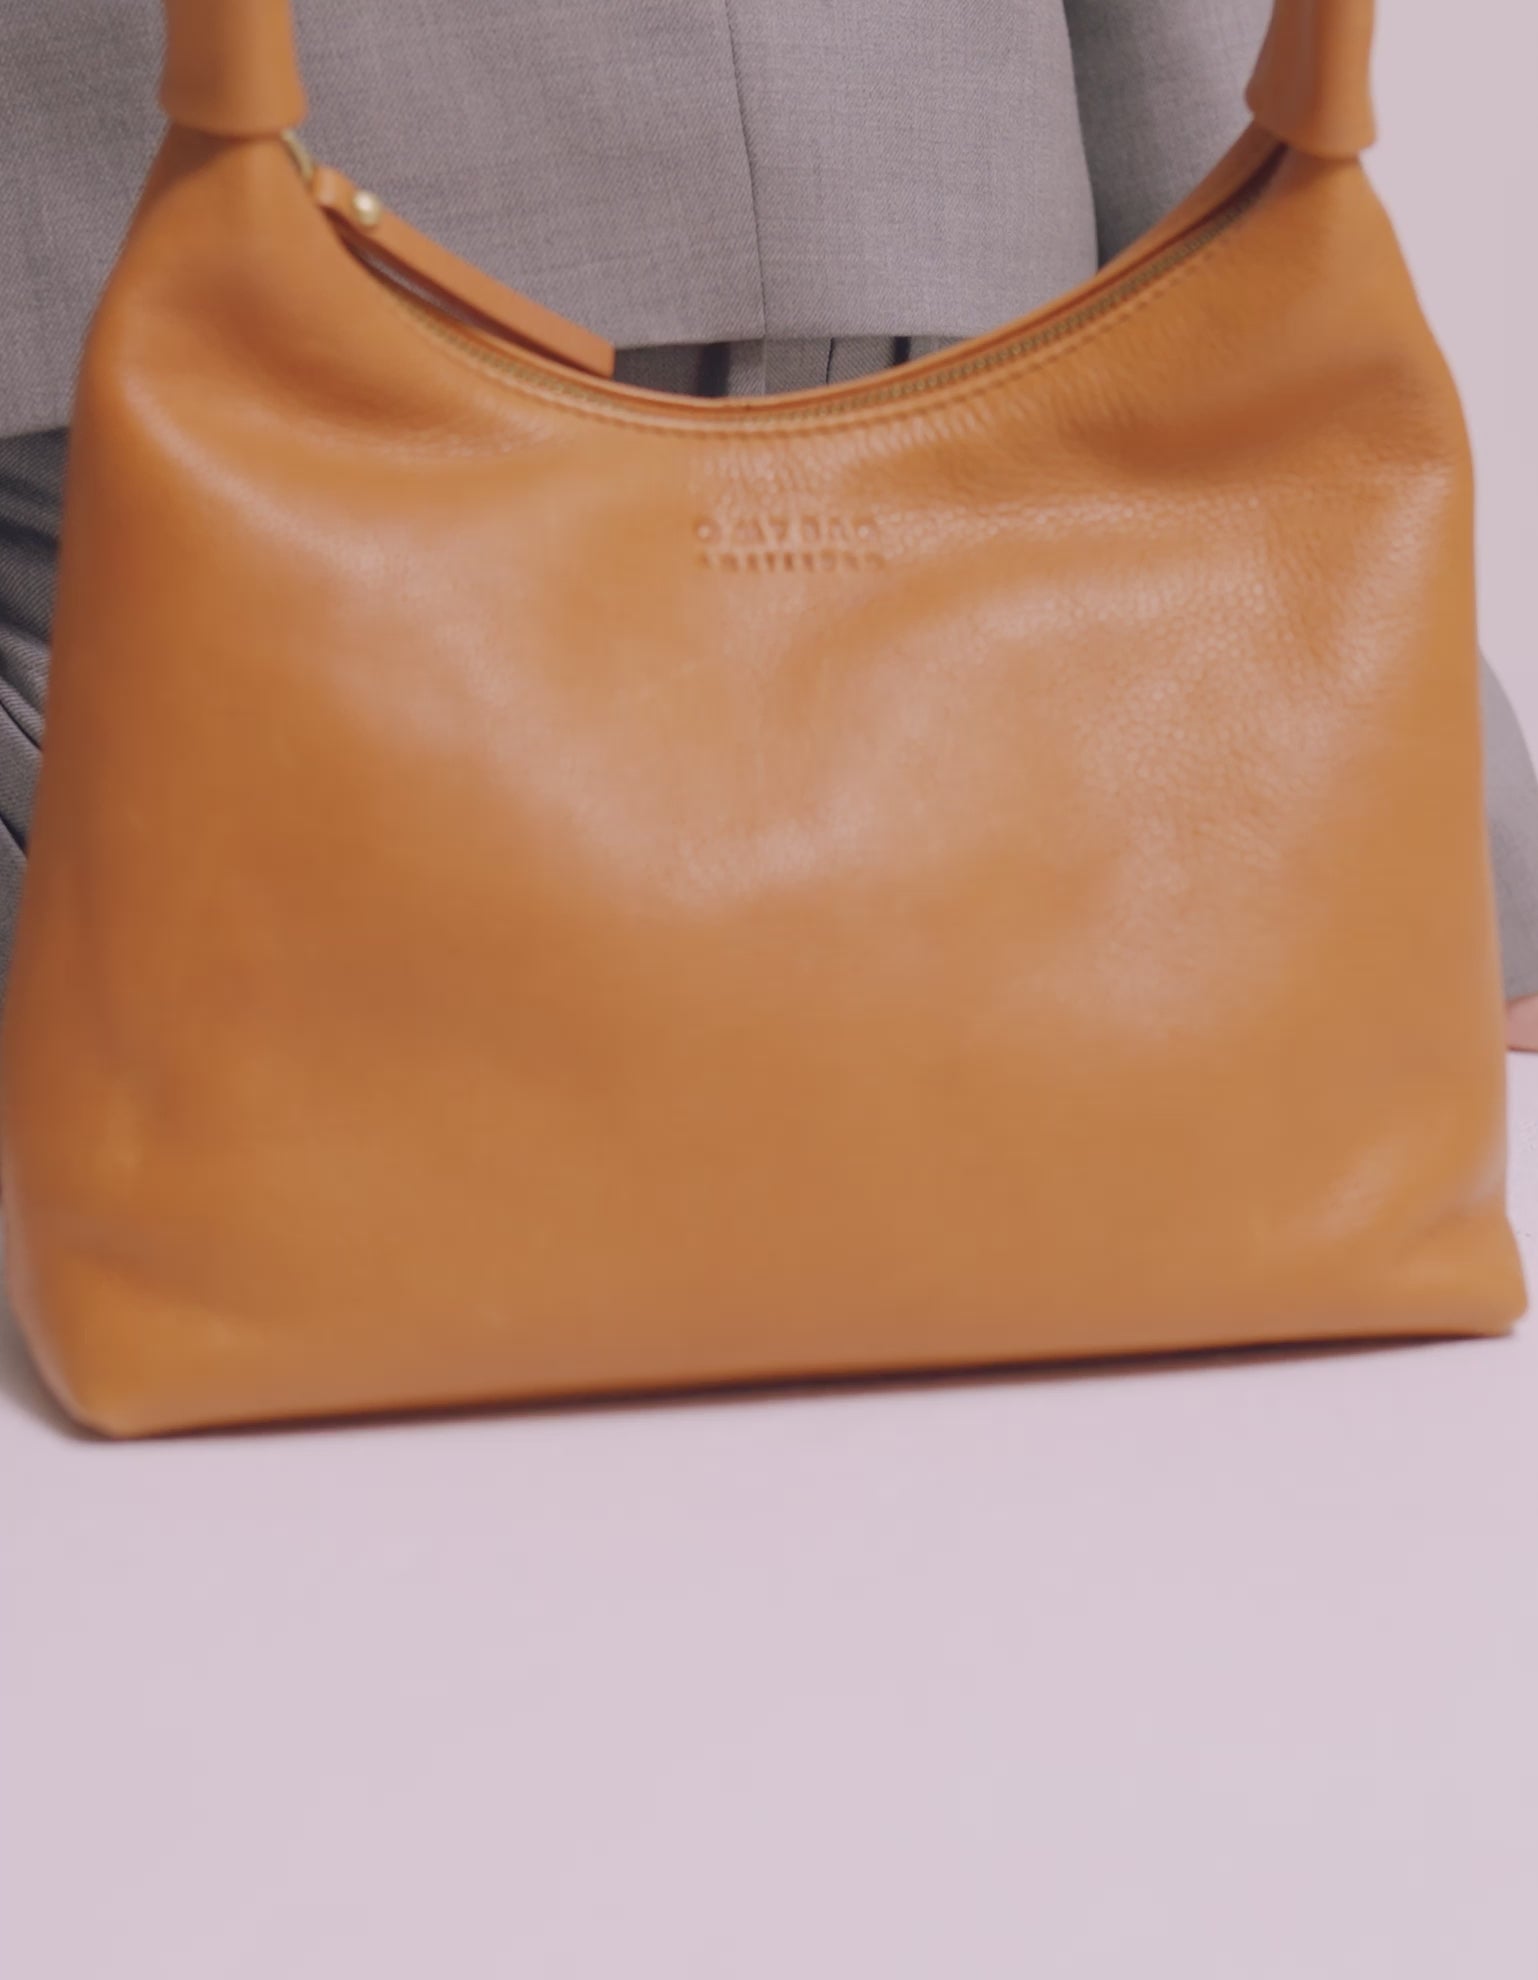 Campaign video of Nora bag with model